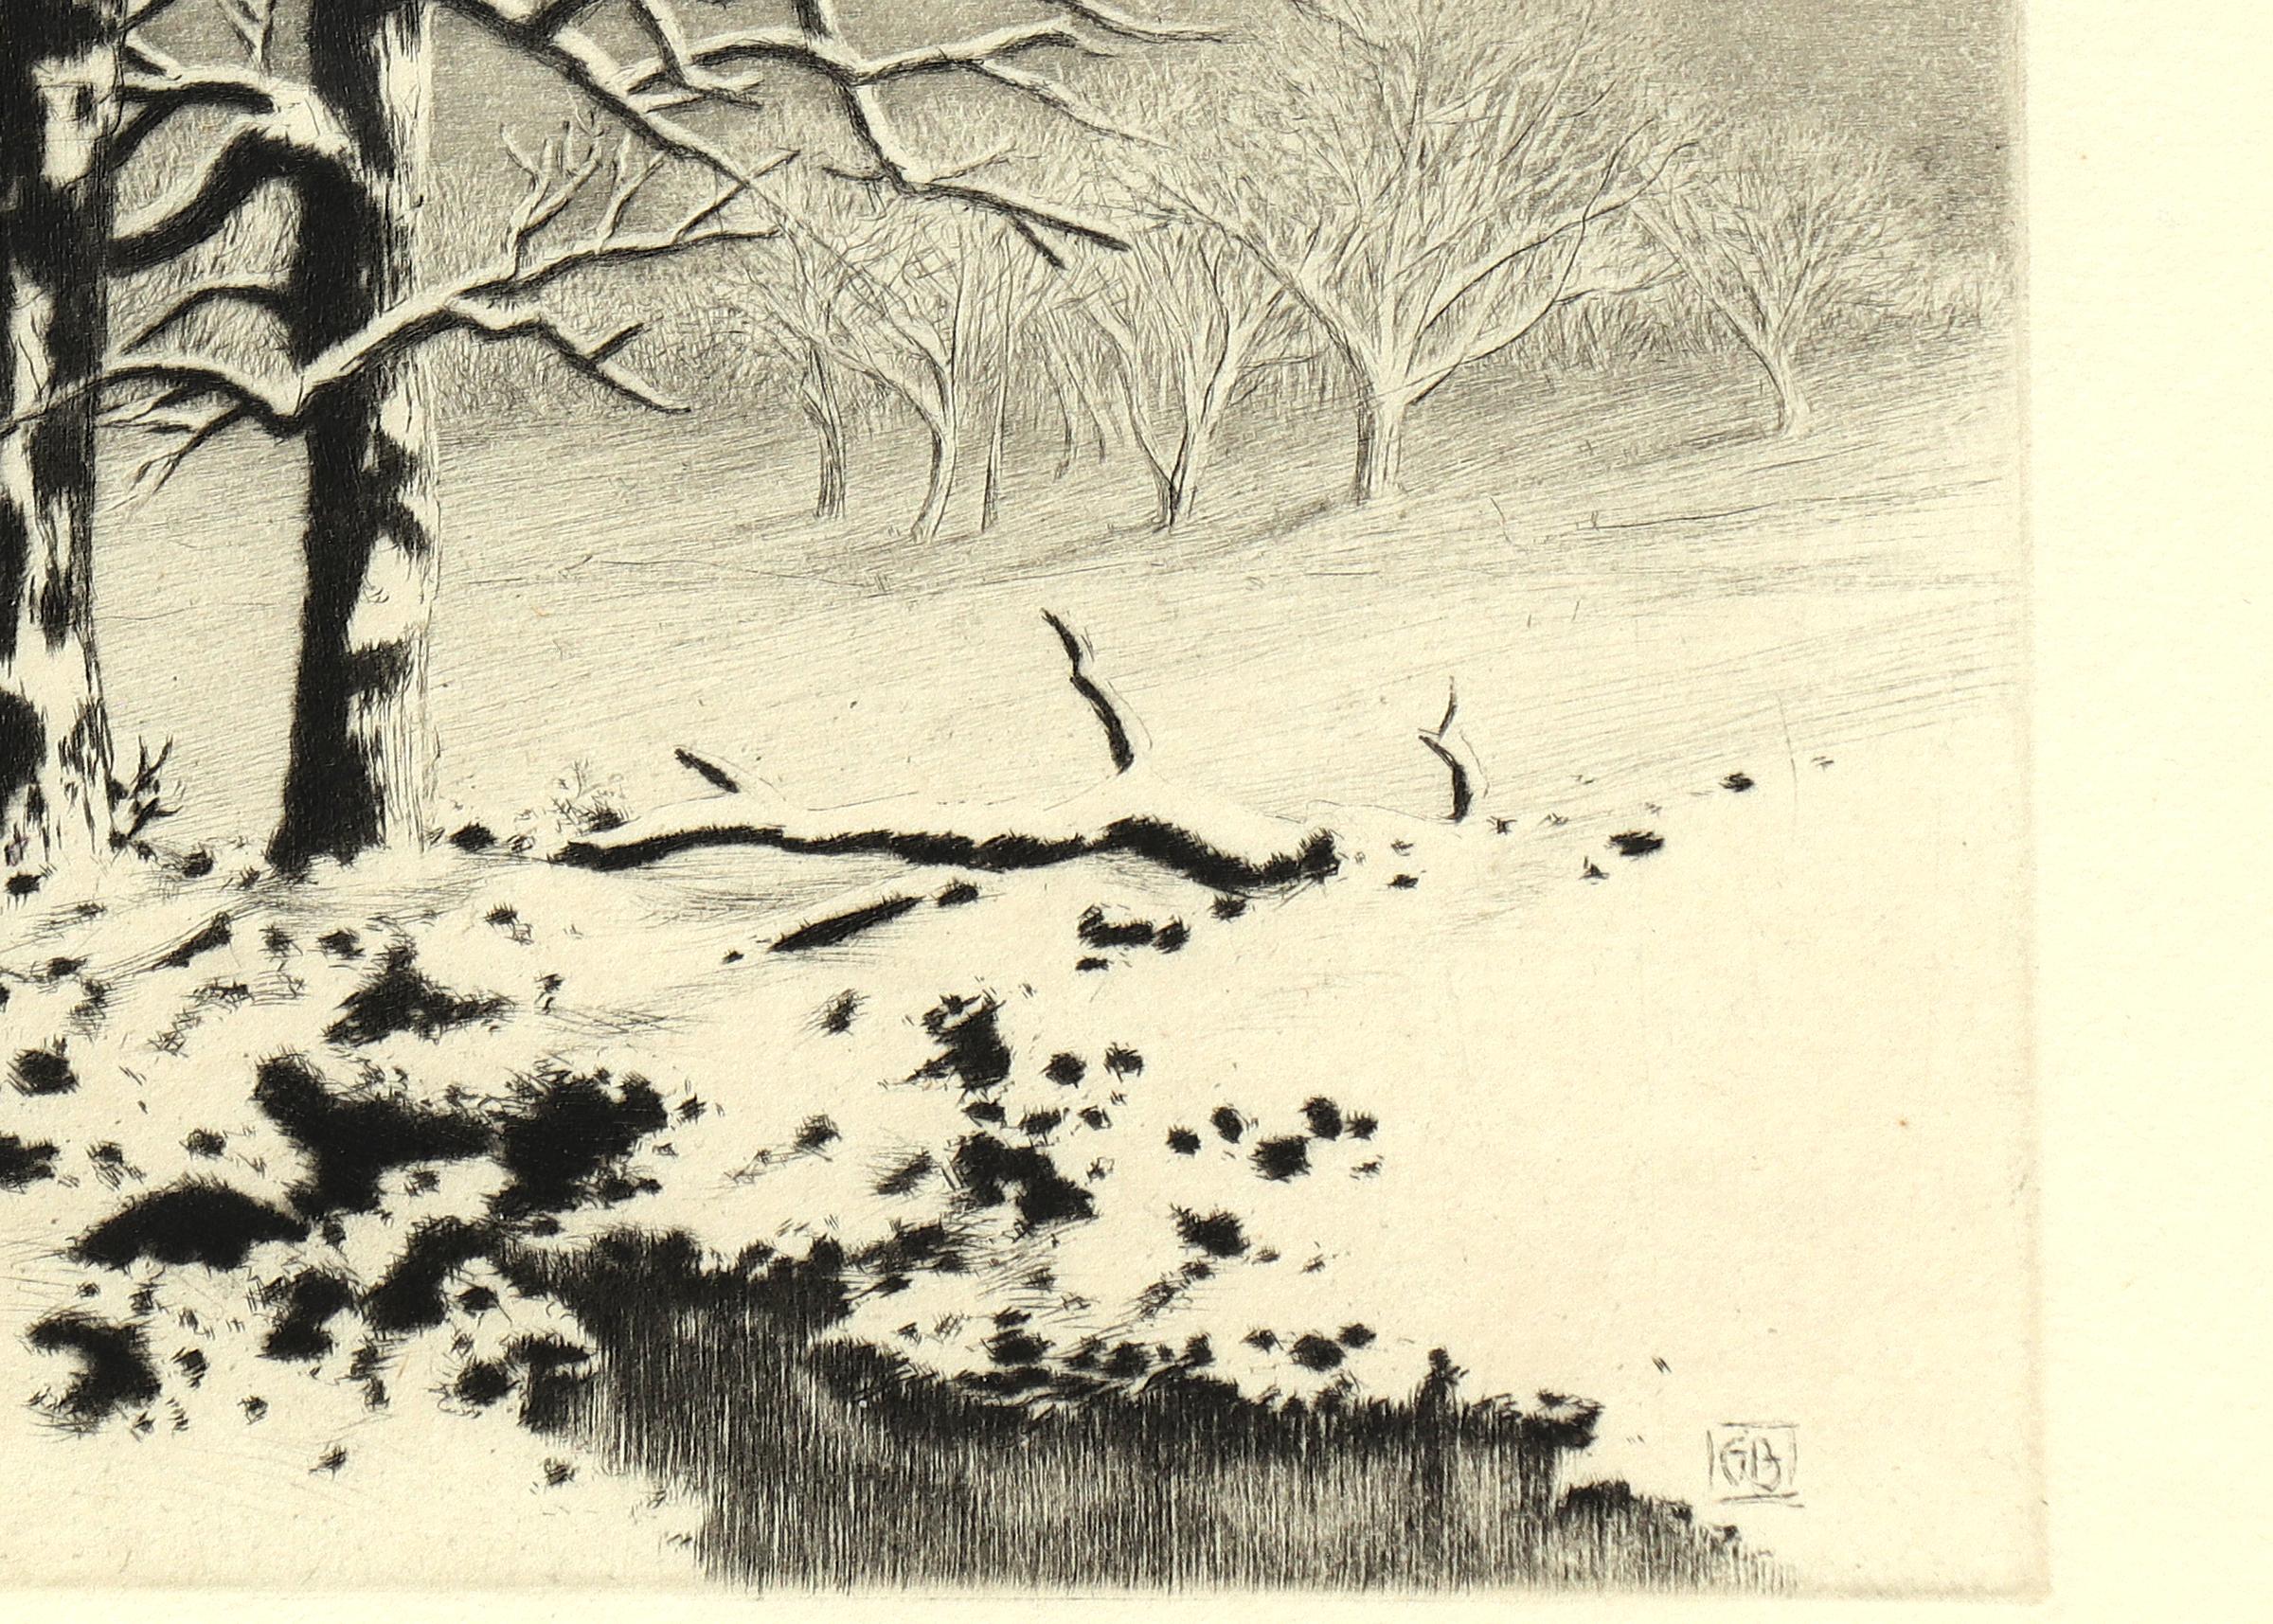 Original Signed Lithograph Print of a Winter Landscape with Snow and Trees - Beige Landscape Print by George Elbert Burr